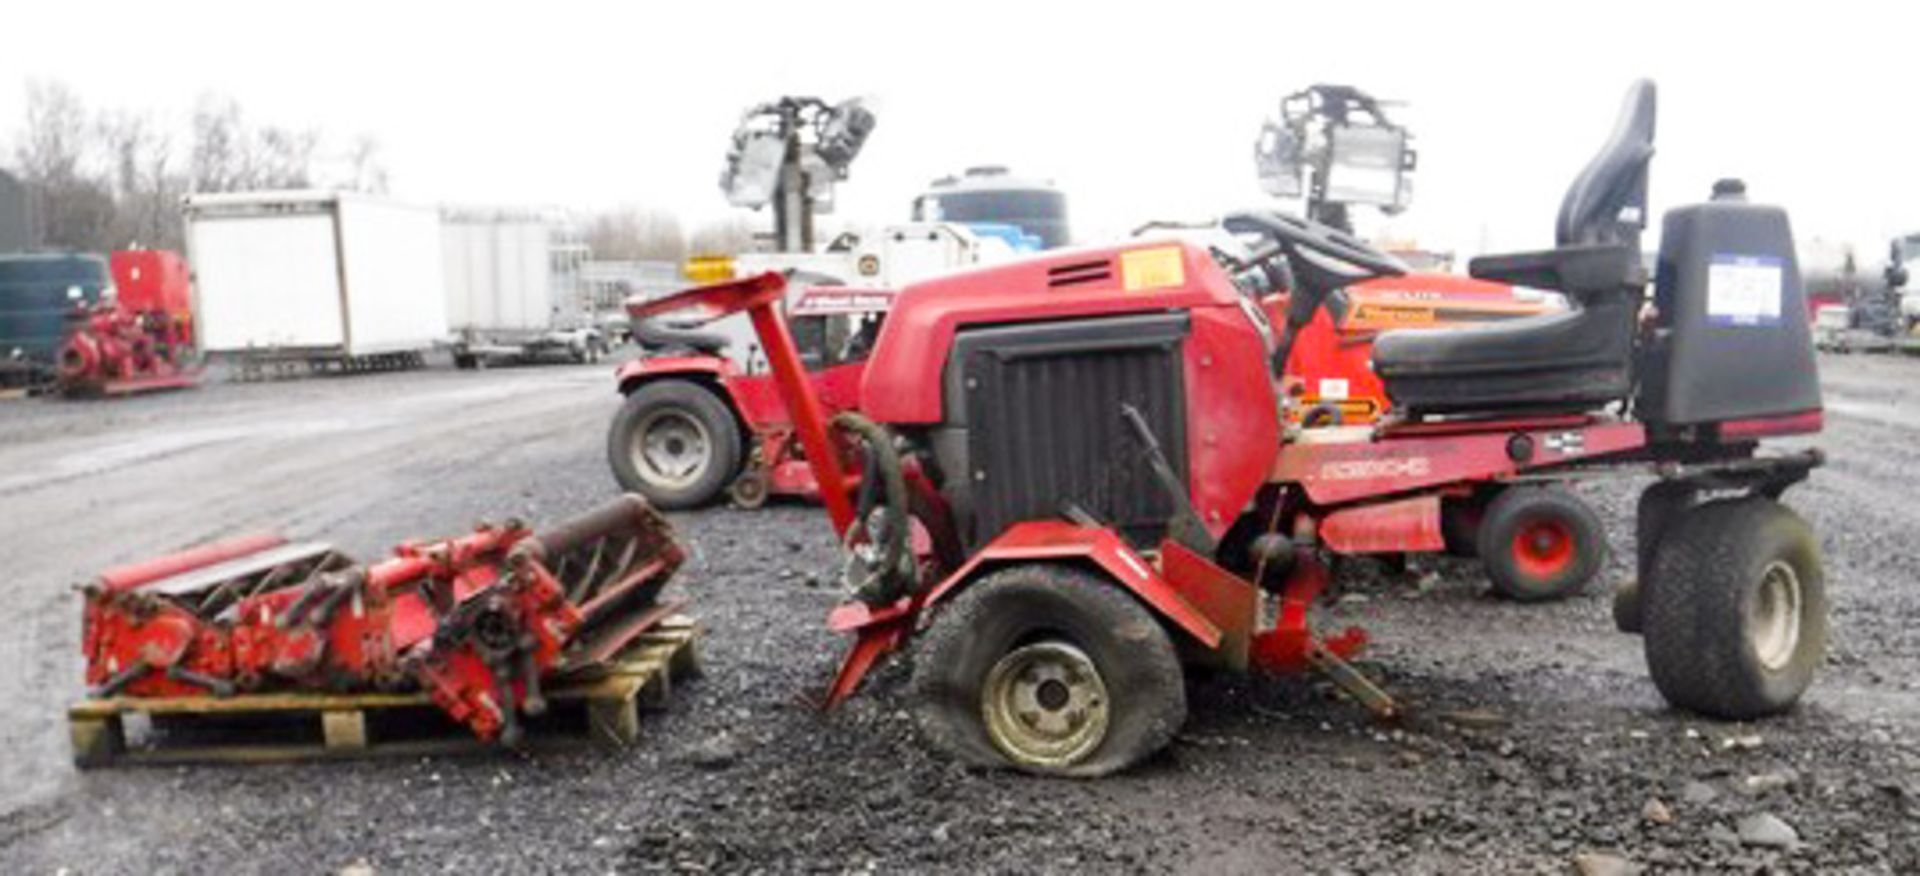 TORO ROADMASTER 2300-D, 2 AXLES, 2888HRS (NOT VERIFIED) & 3 UNITS ON PALLETS - Image 3 of 8